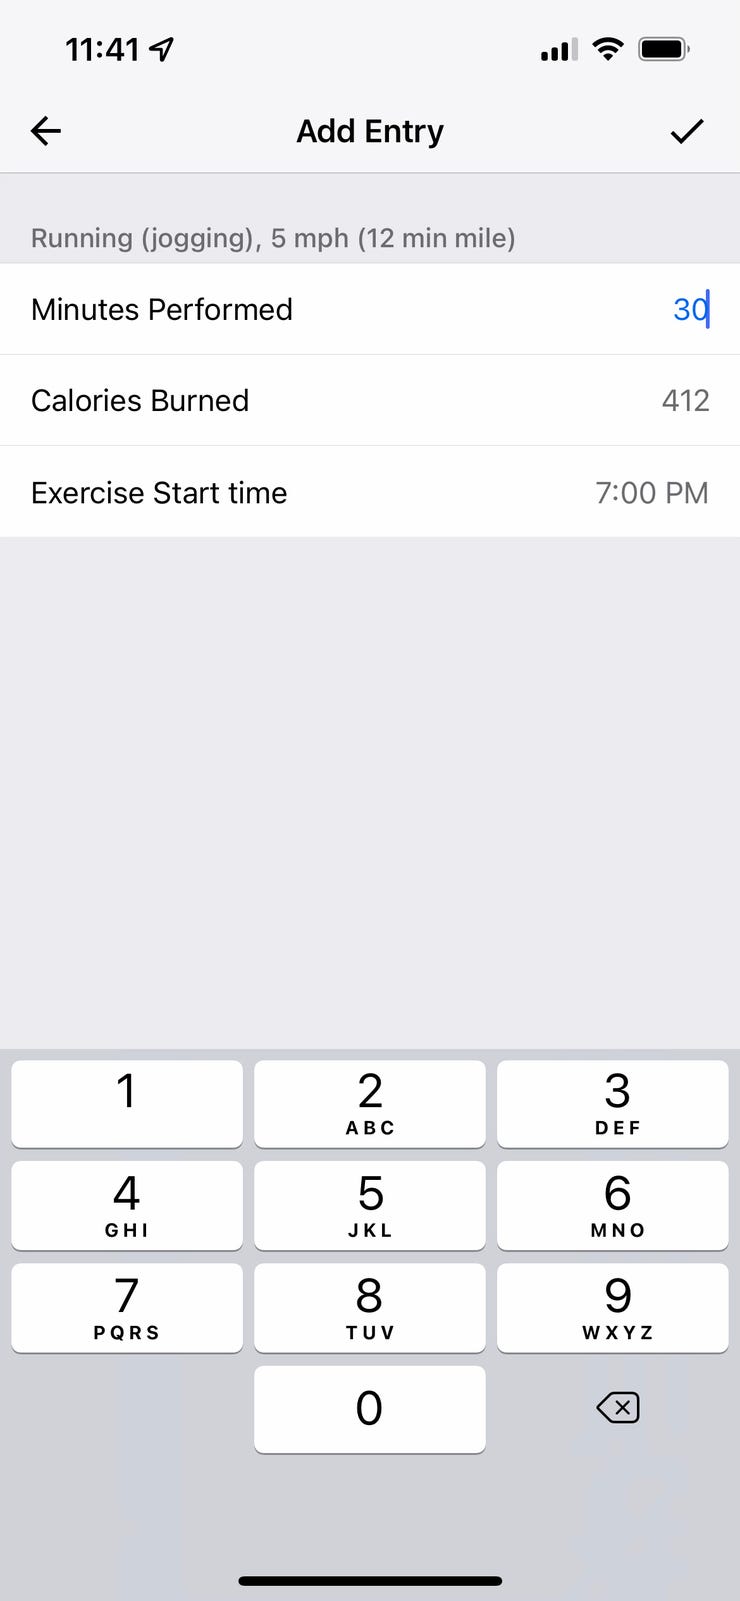 On the Go Fitness Pro - A Personal Trainer's Review of MyFitnessPal